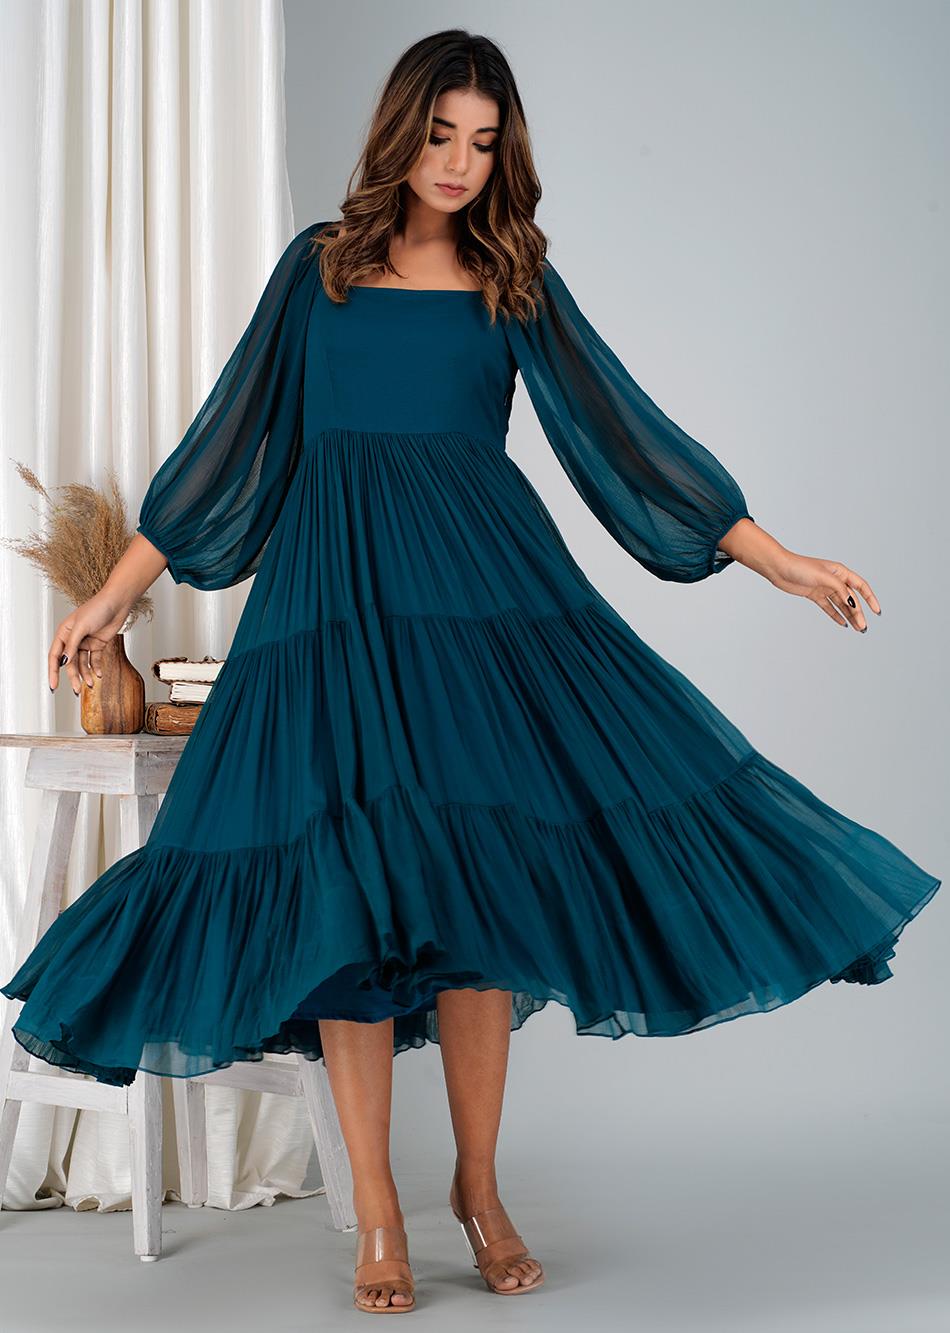 Teal Tiered Dress